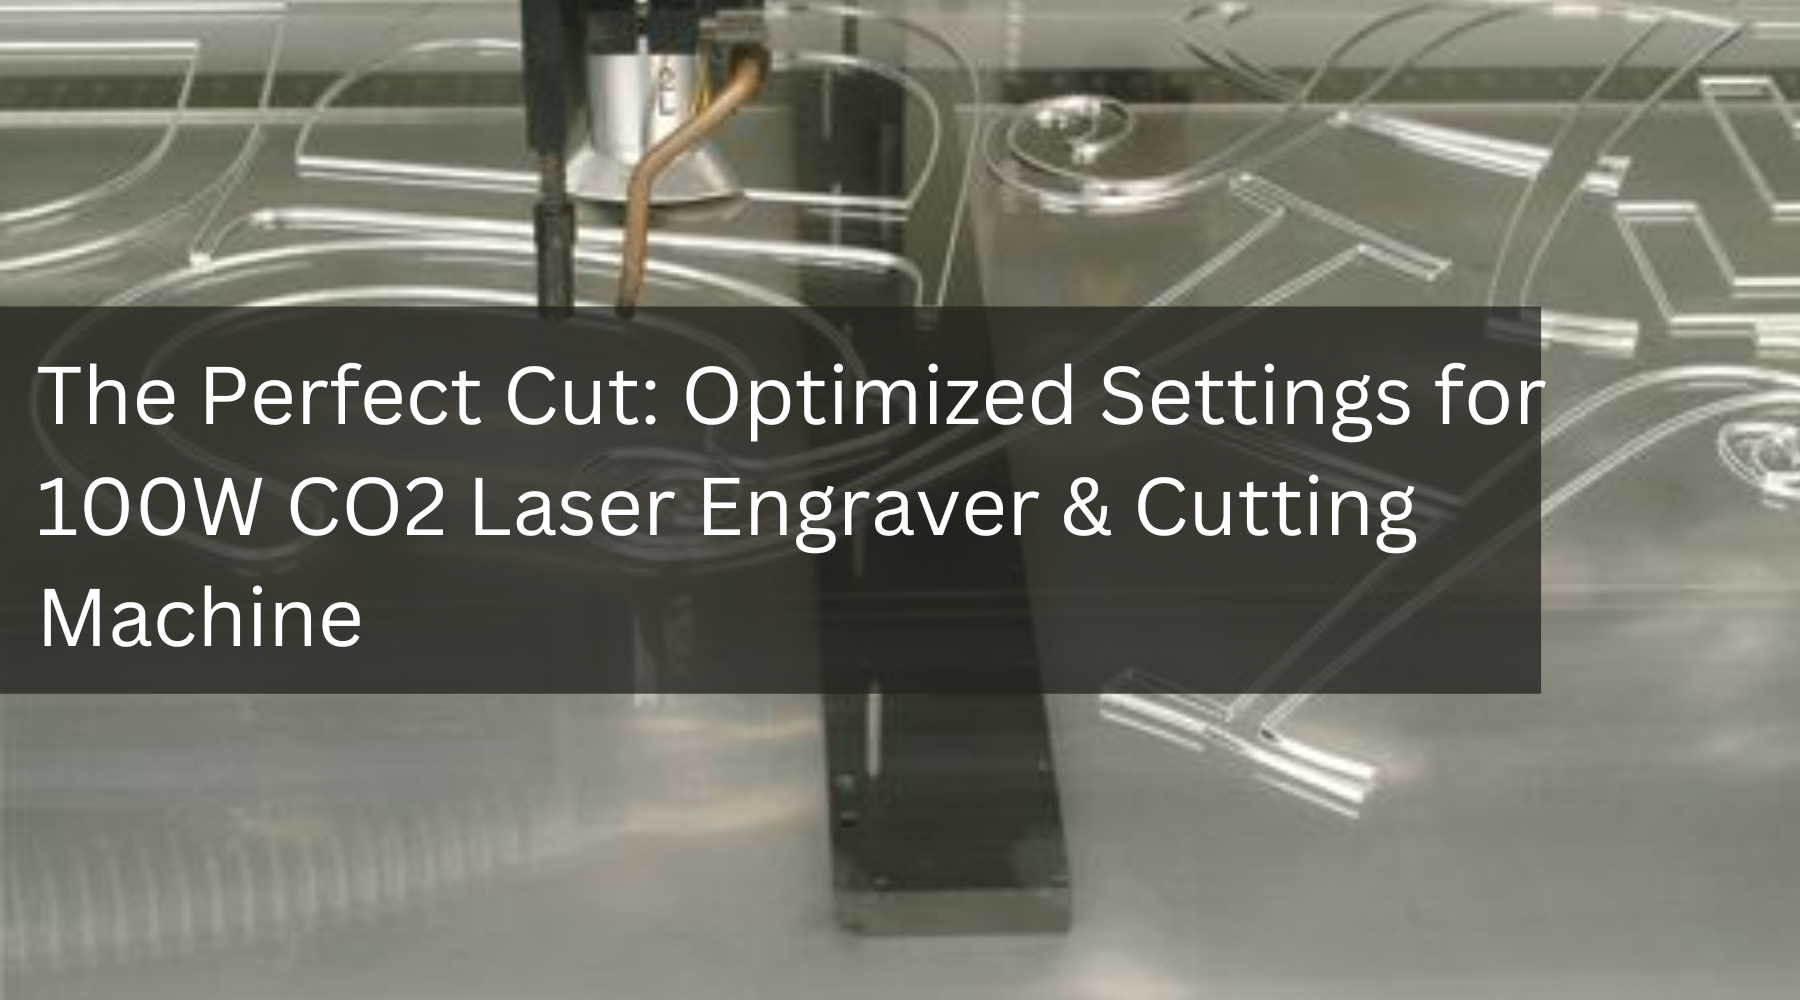 The Perfect Cut: Optimized Settings for 100W CO2 Laser Engraver & Cutting Machine